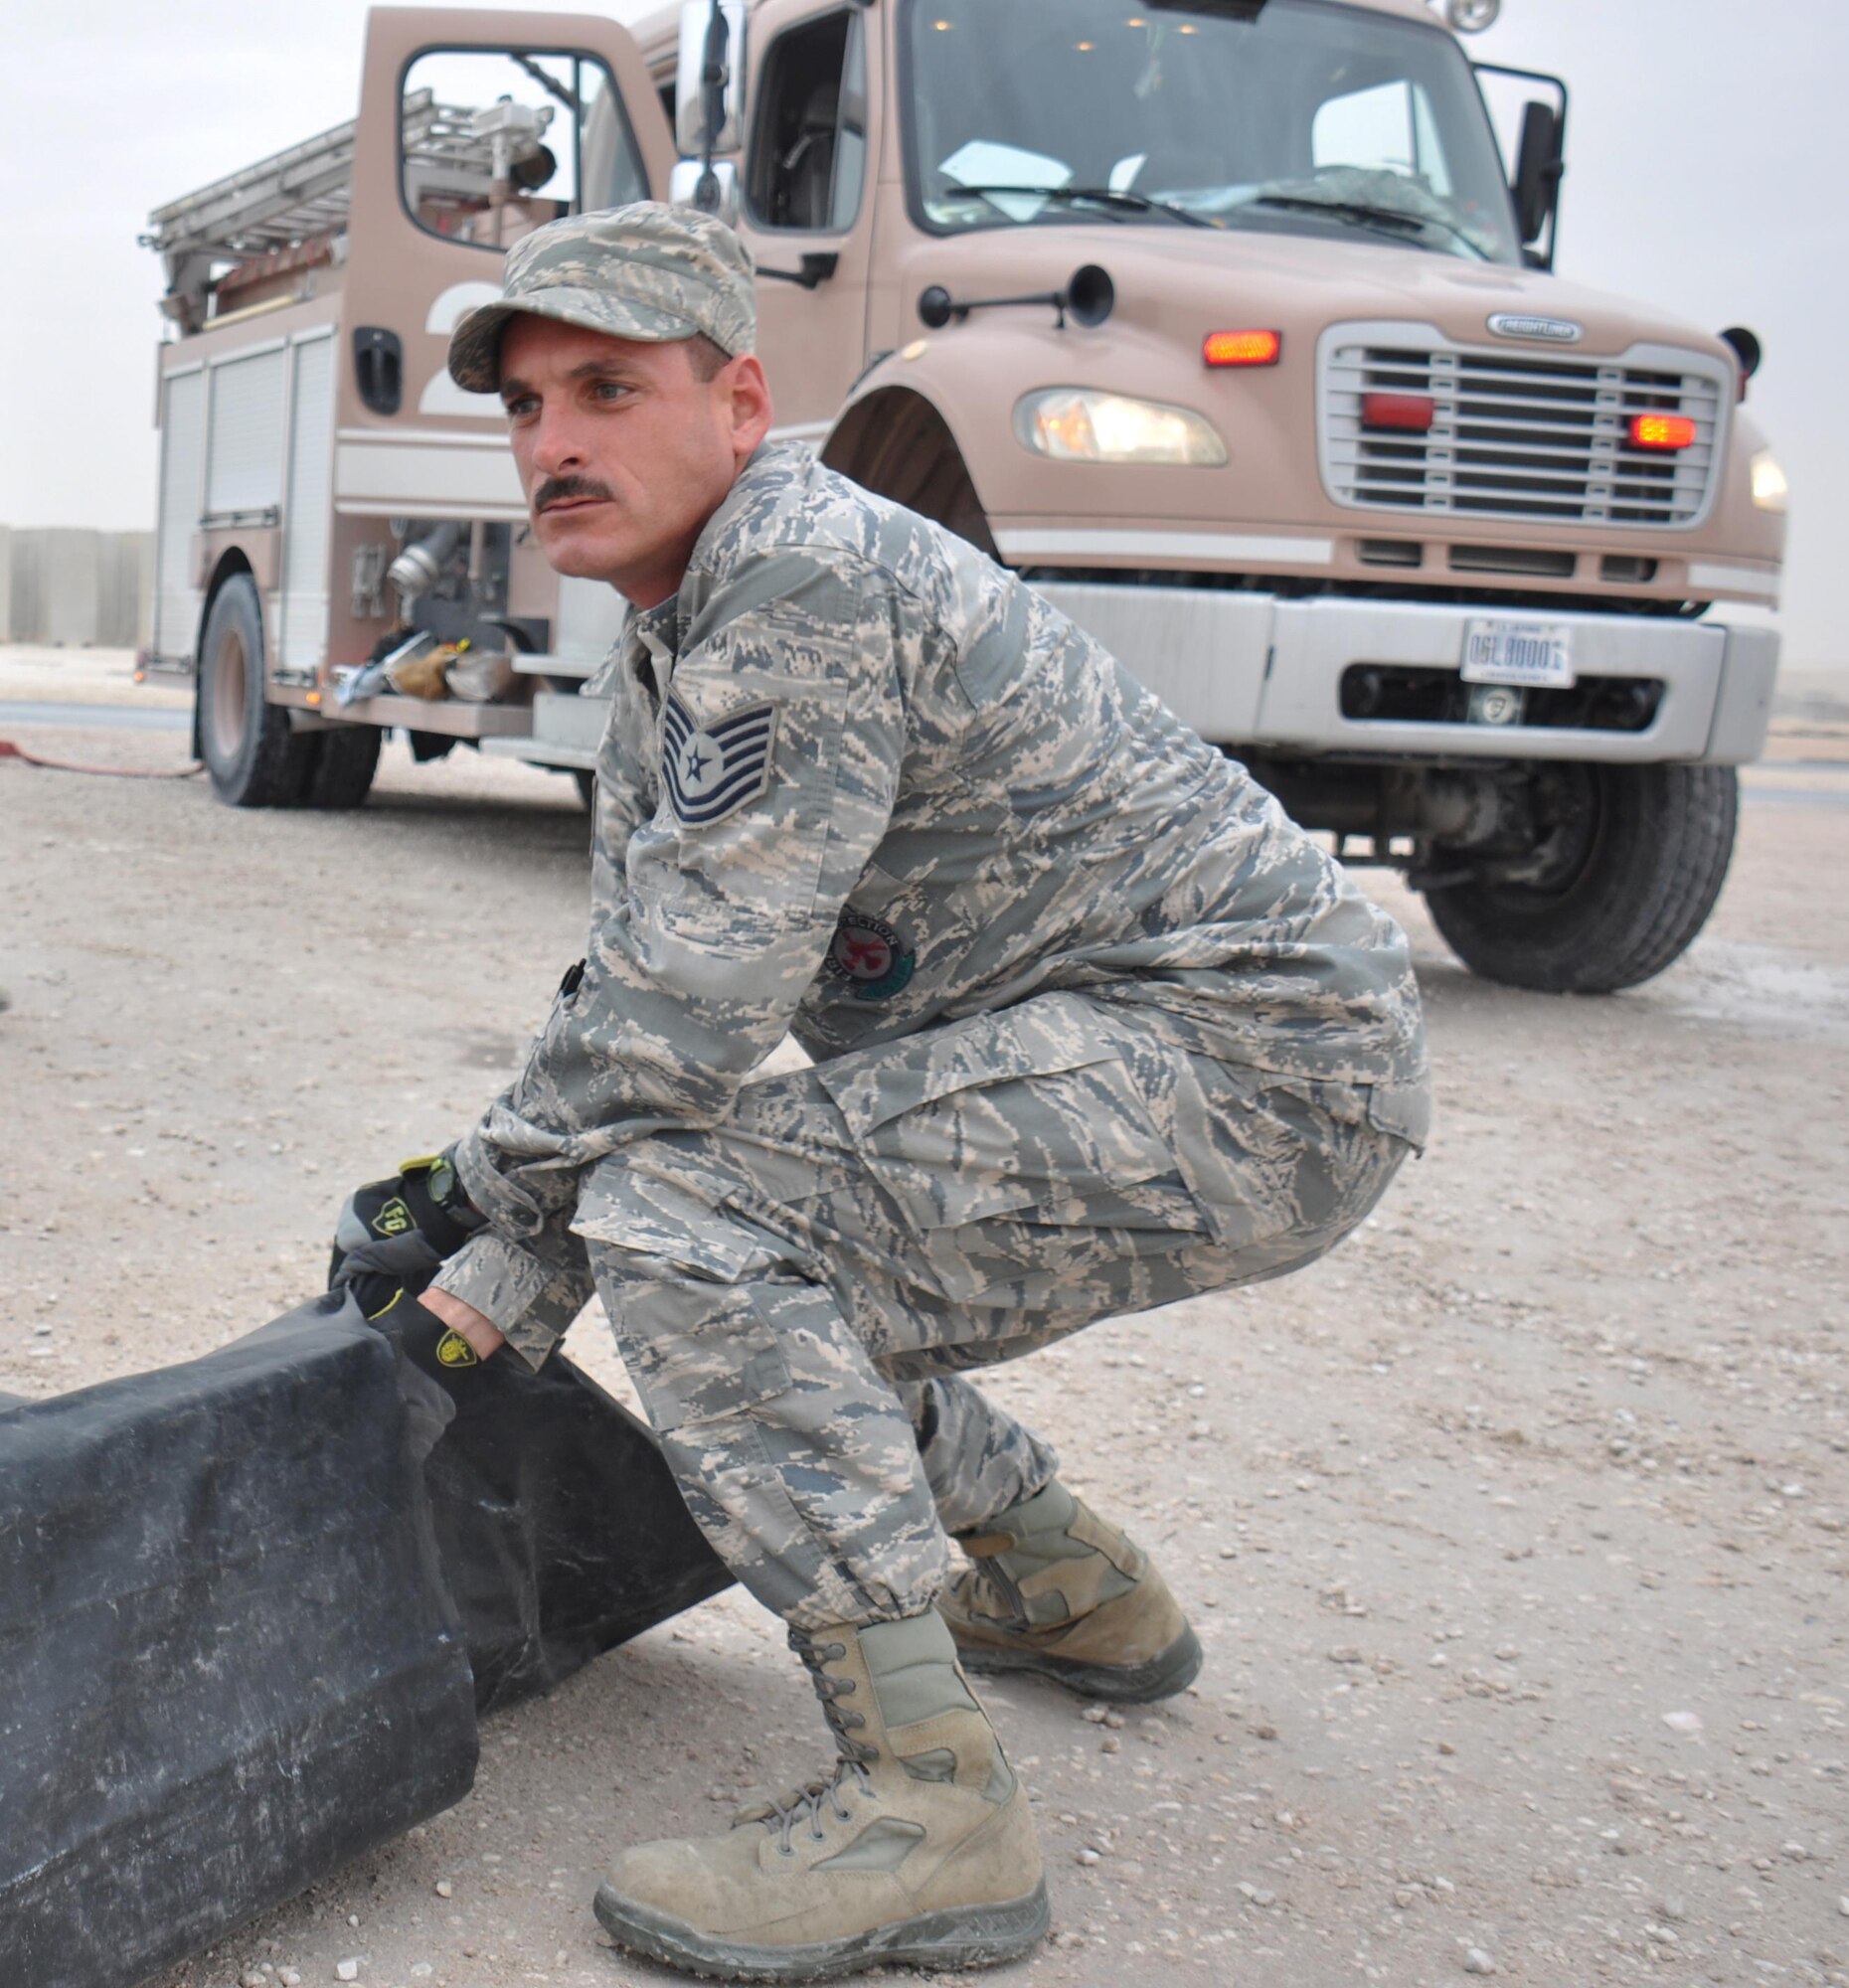 Tech. Sgt. Mickey Jackson, 379th Expeditionary Civil Engineer Squadron firefighter, helps set up a decontamination processing area outside the entrance of a hazardous materials exercise at Al Udeid Air Base, Qatar March 16. The training exercise, which featured mock explosives and chemicals, provided first responders an opportunity to practice reacting to an emergency incident. Several emergency personnel participated in the exercise including security forces and medics. (U.S. Air Force photo by Tech. Sgt. James Hodgman/Released)